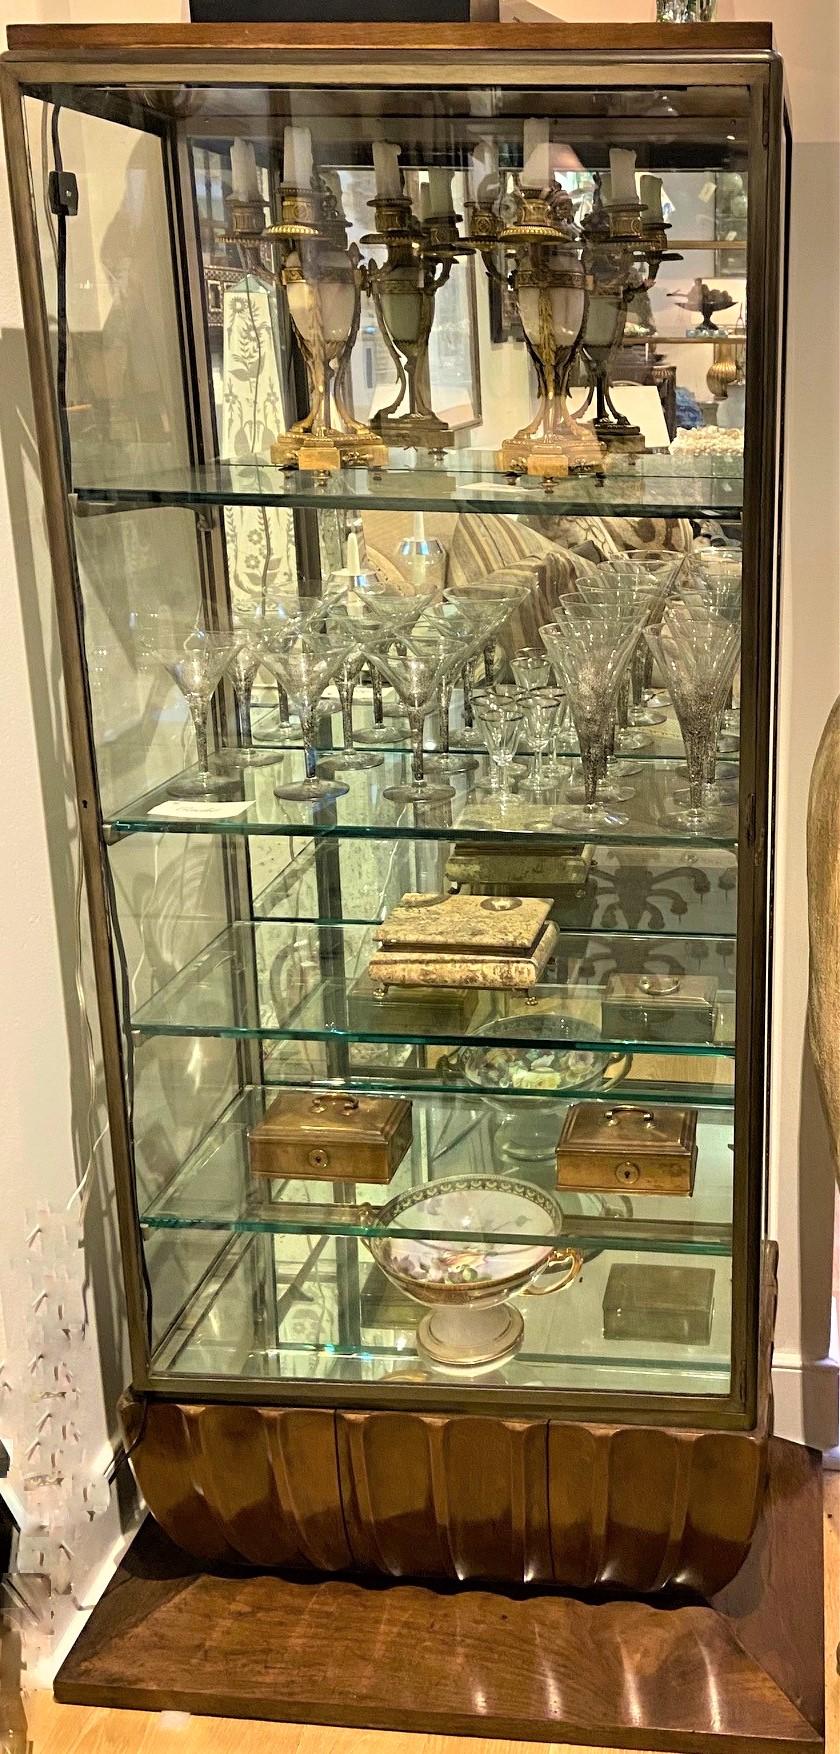 Vintage 1930s Art Deco display case made in nickle plated with original matching adjustable four glass shelves, mirrored back and bottom shelf, functioning lighting, sides and glass door opening, carved walnut finish base.